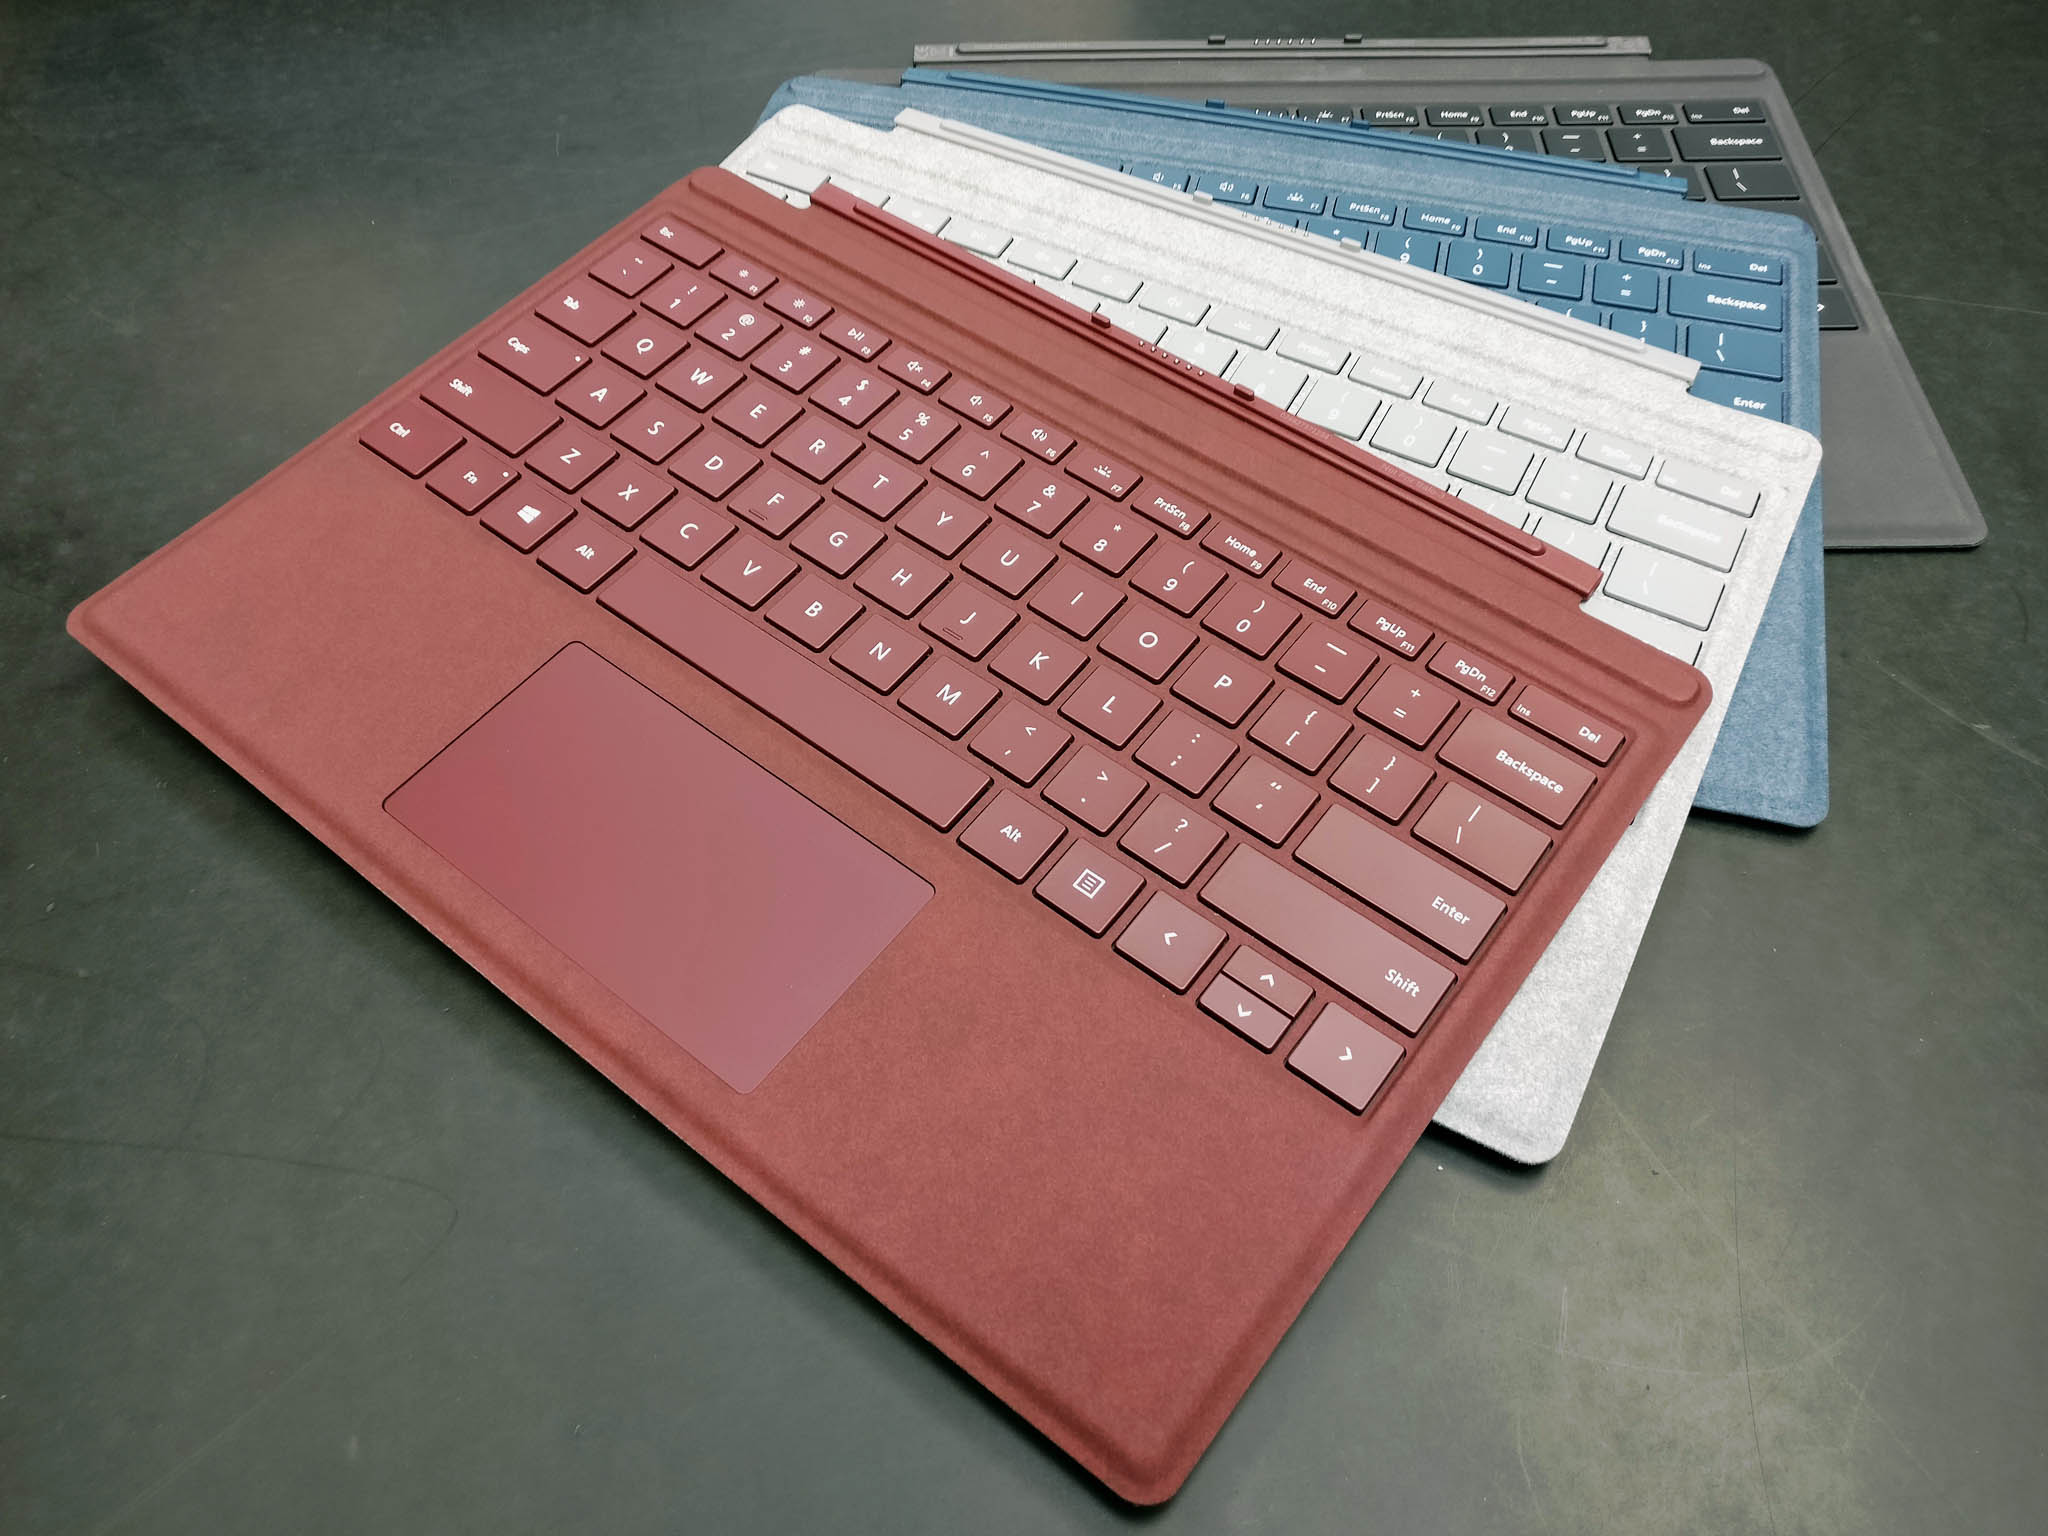 Chime in: Share your favorite third-party Surface Pro keyboard